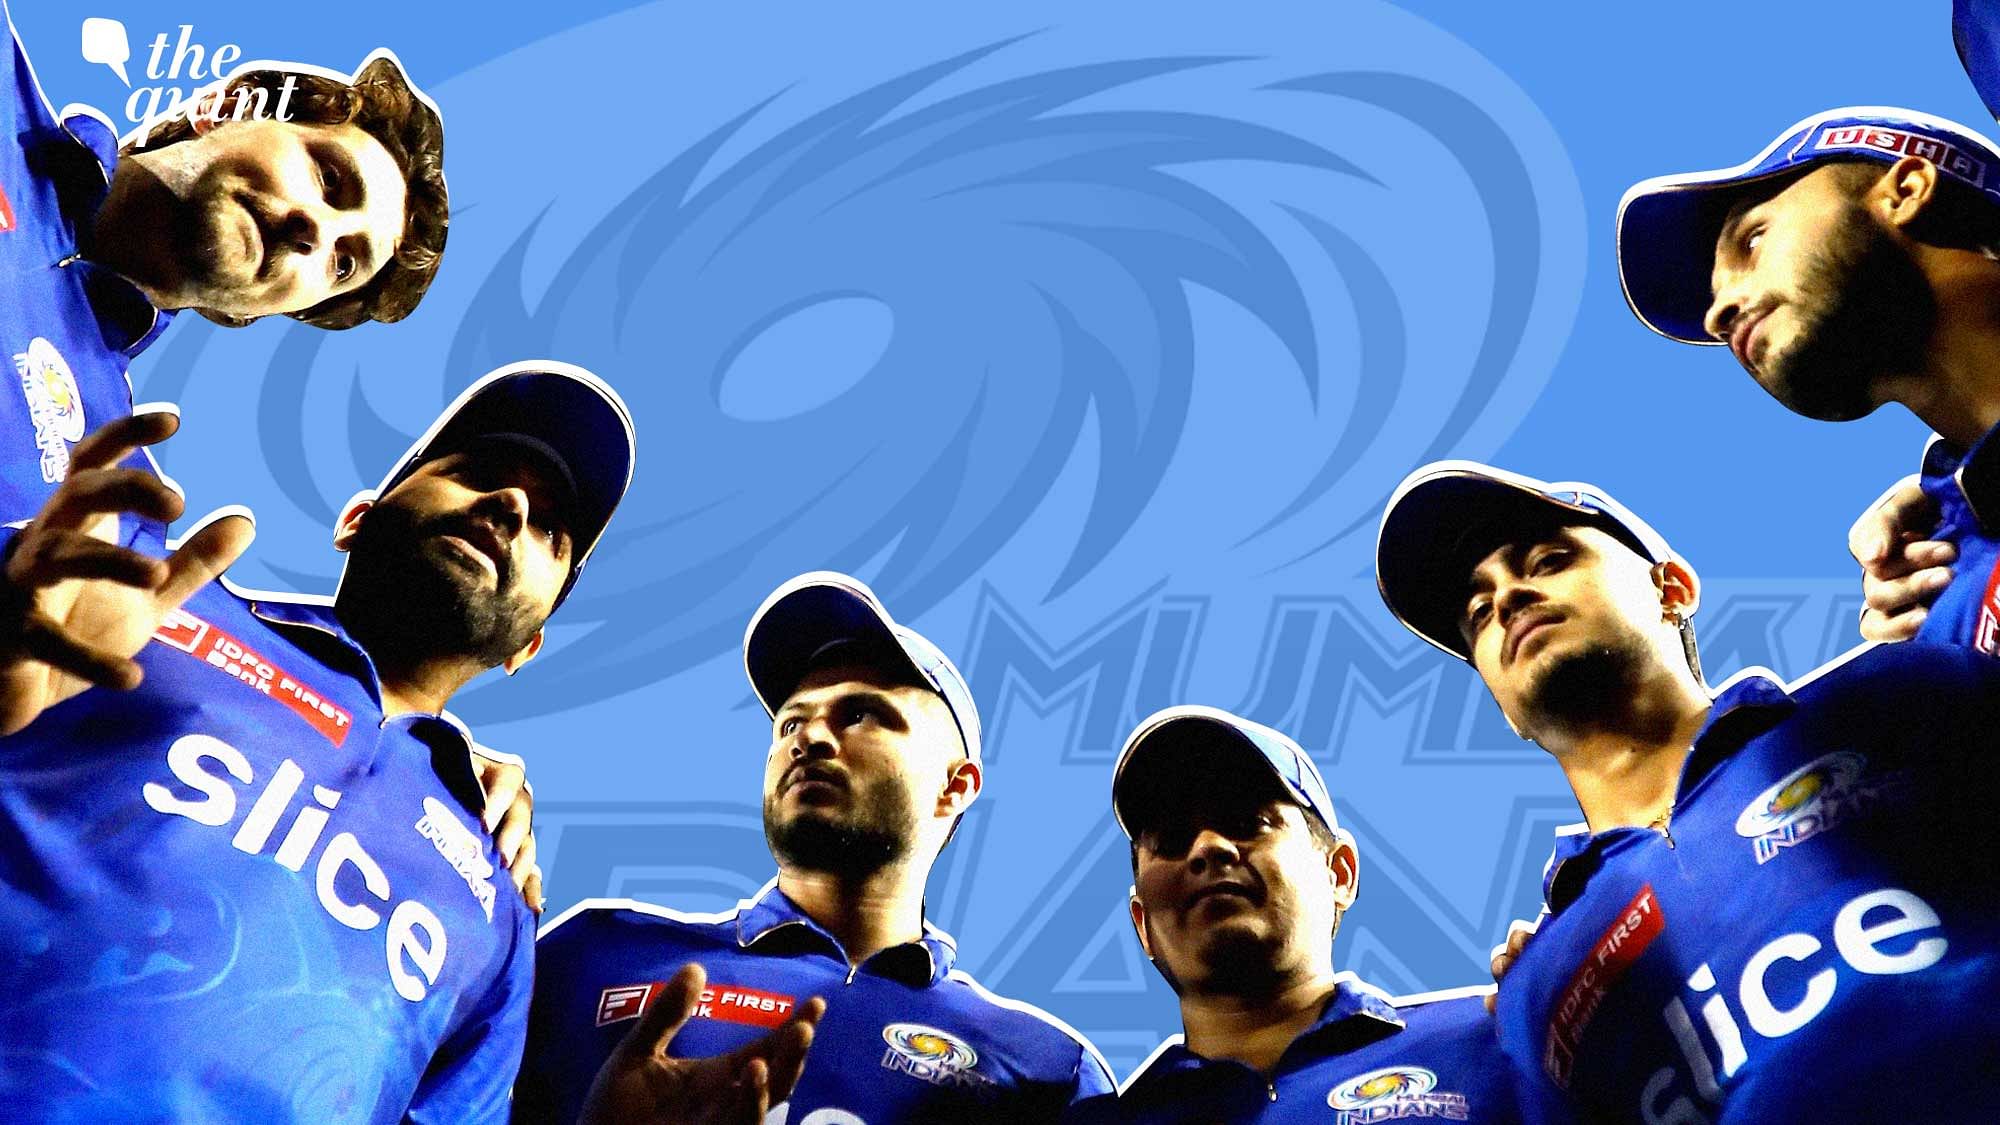 RETAINED! We reveal the first look of the GT squad for IPL 2024